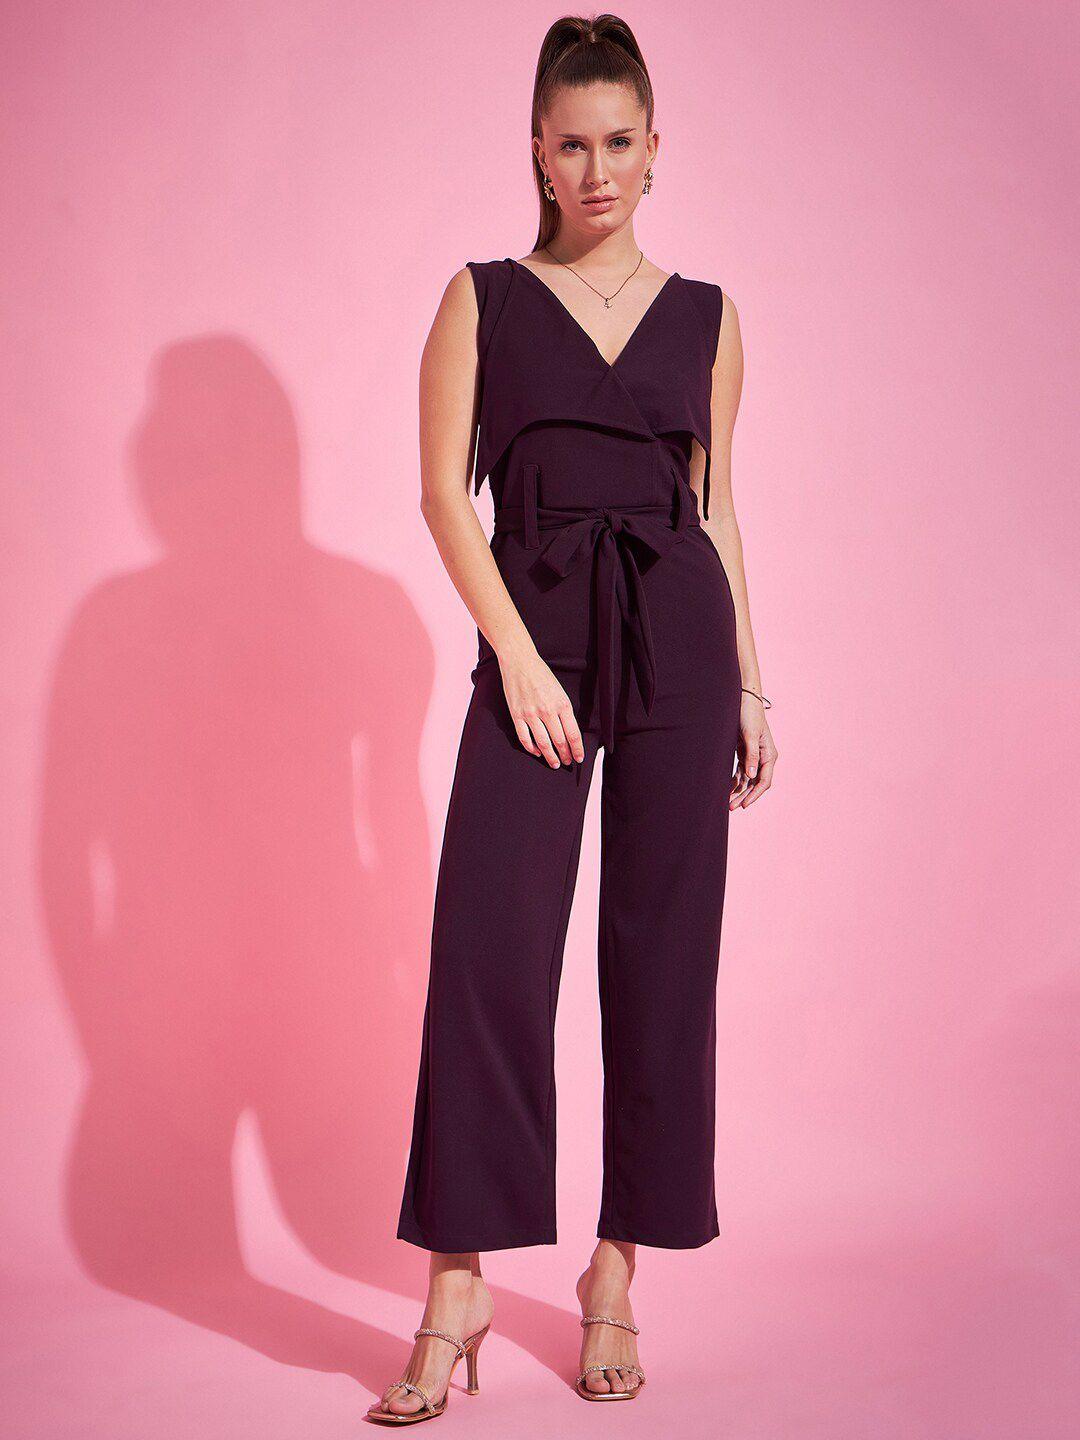 purple feather wide collared v-neck belted basic jumpsuit